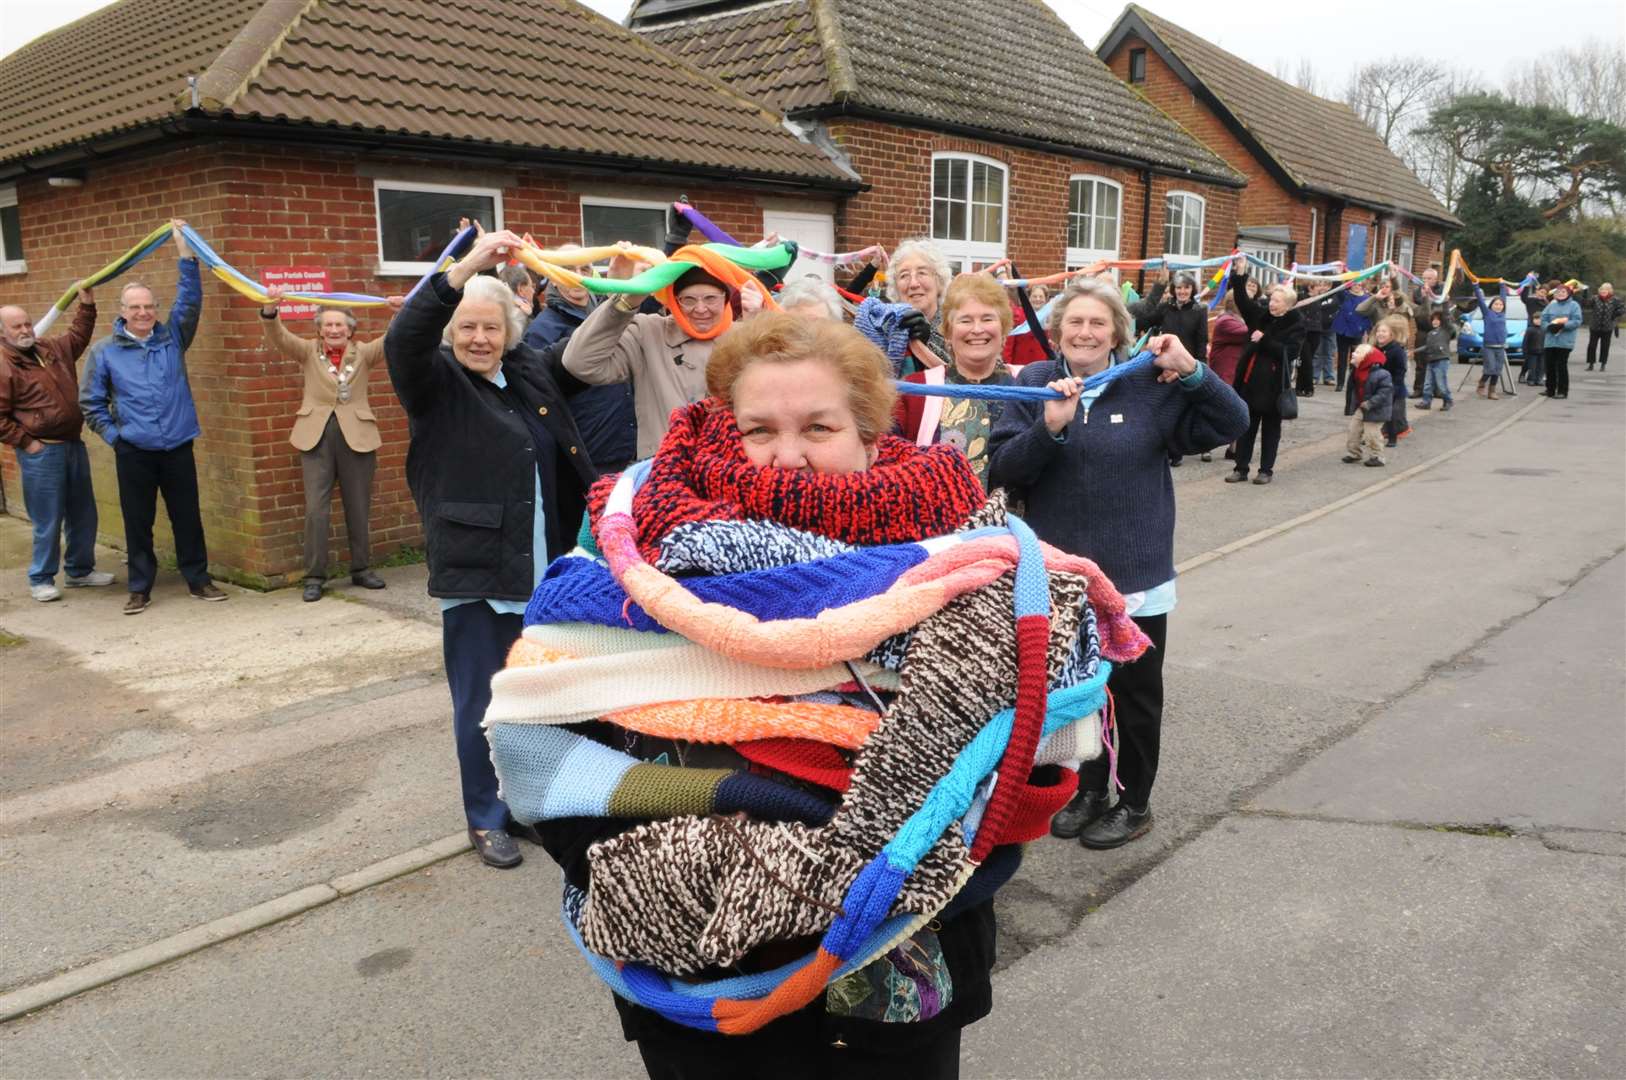 Cllr Barbara Flack wrapped in a giant scarf created by knitters in Blean as part of a world record attempt in 2012